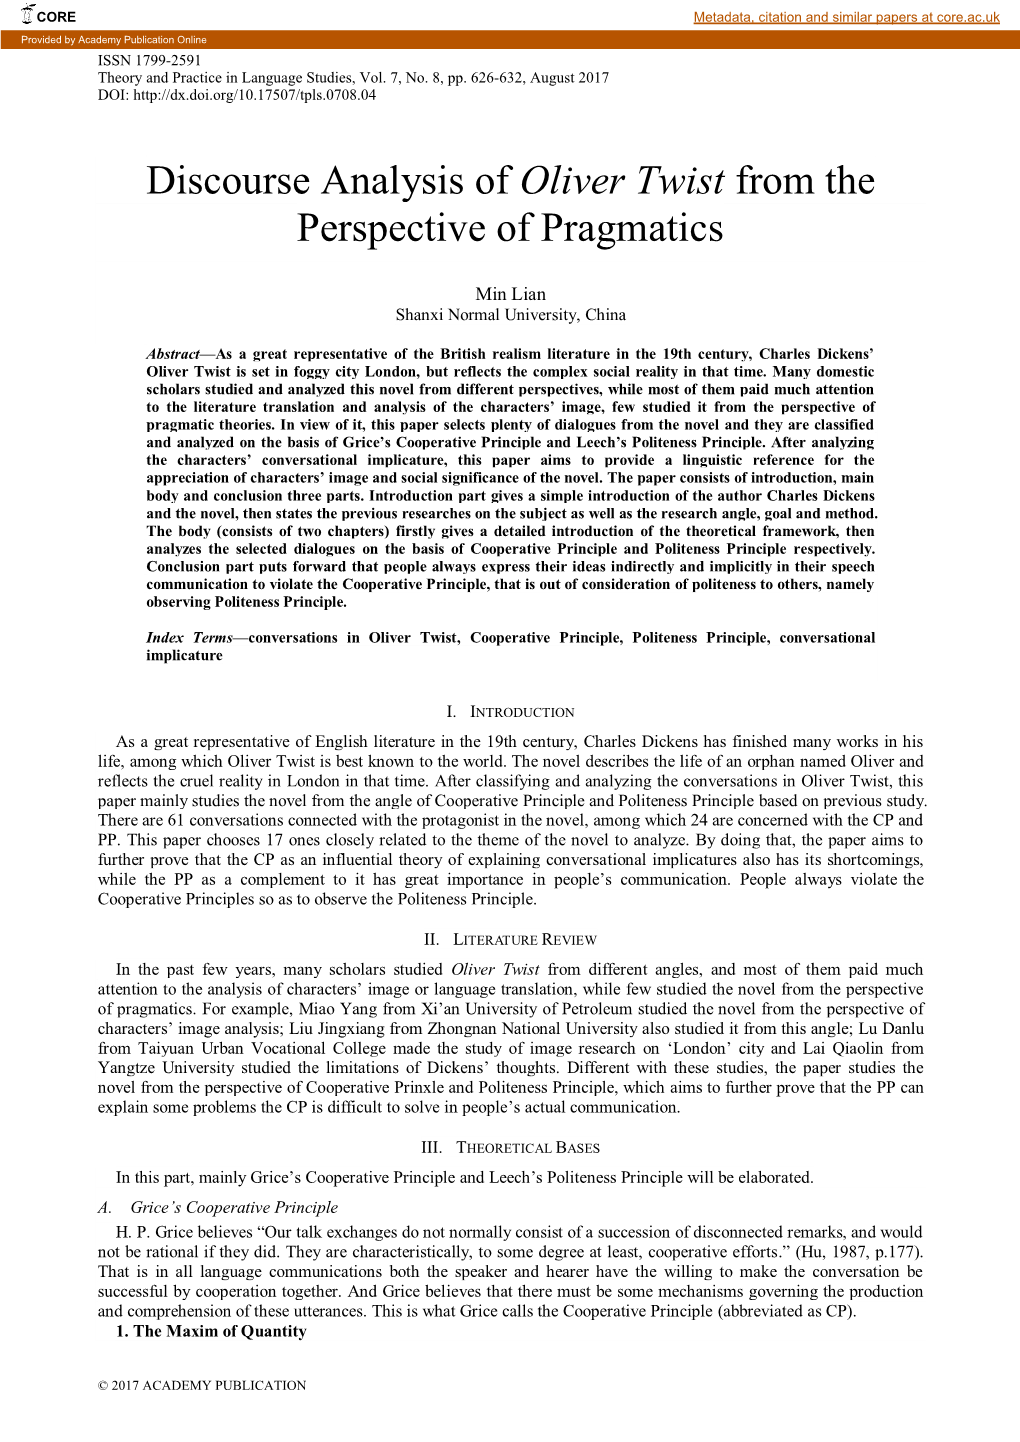 Discourse Analysis of Oliver Twist from the Perspective of Pragmatics